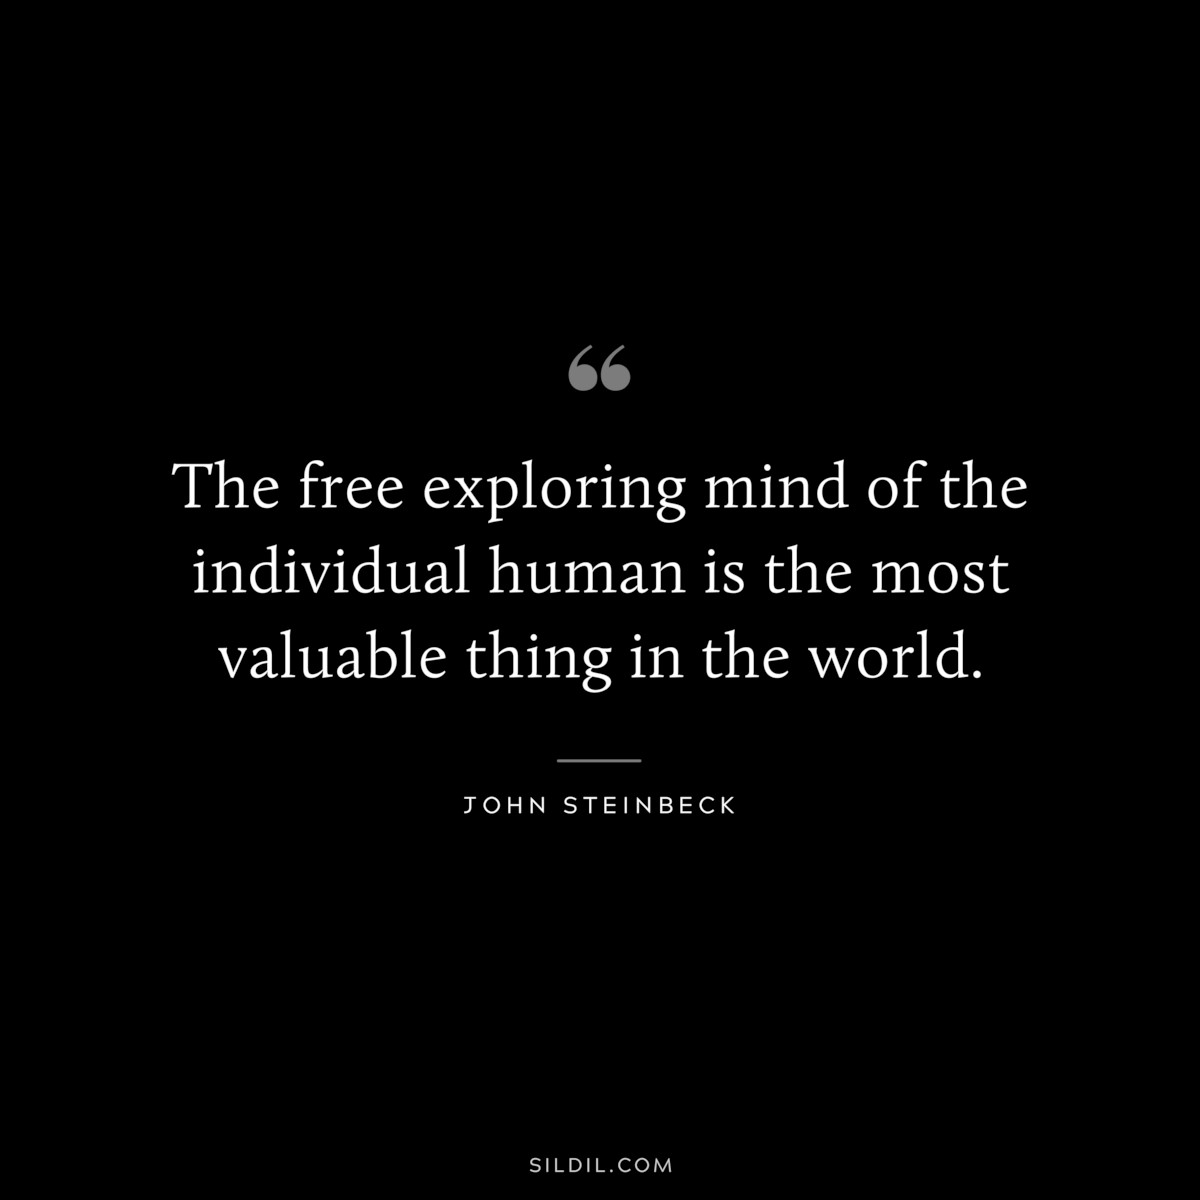 The free exploring mind of the individual human is the most valuable thing in the world.― John Steinbeck